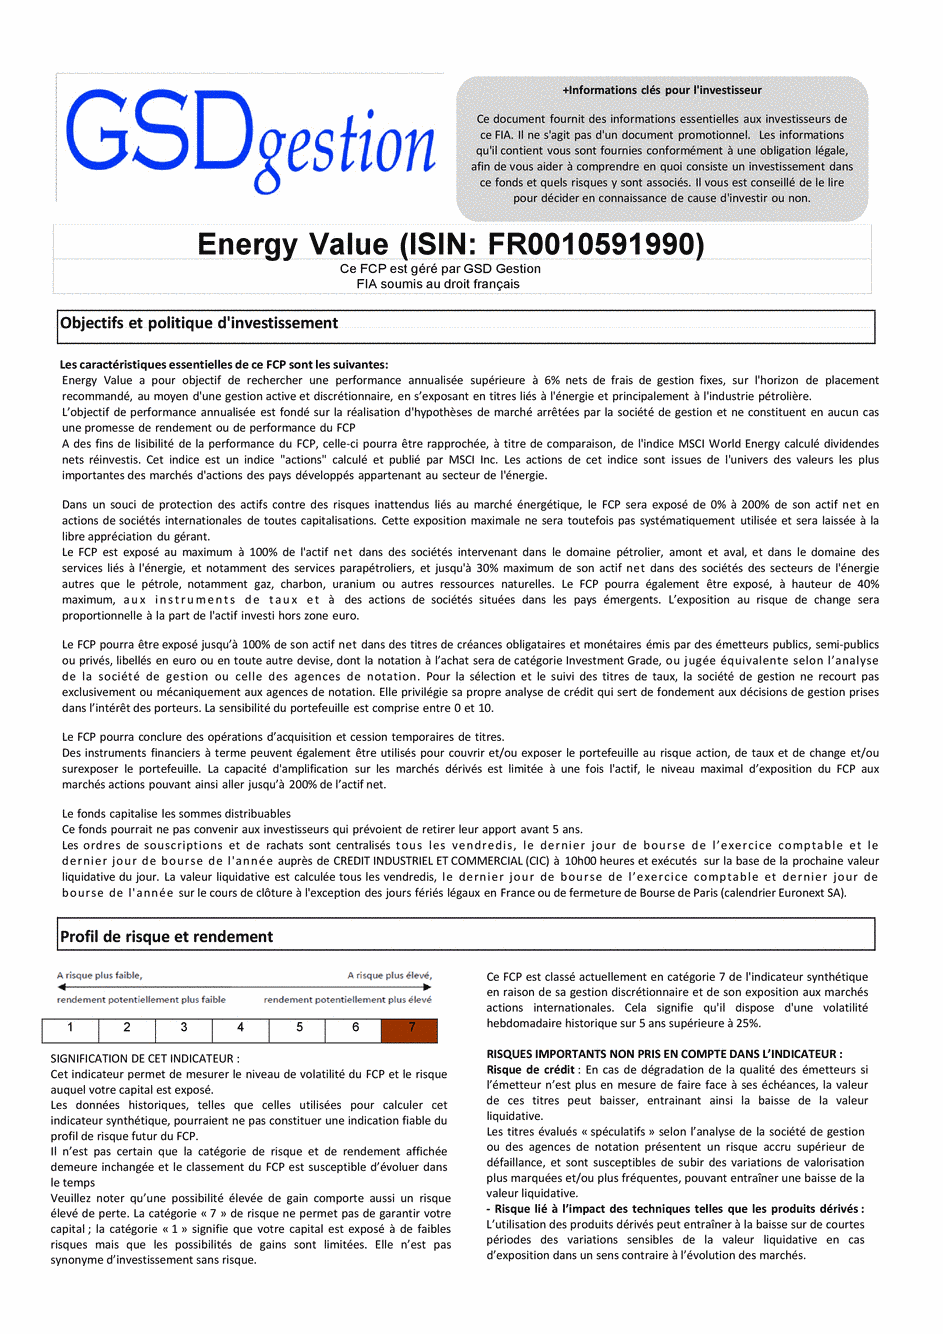 DICI-Prospectus Complet Energy Value - 05/07/2019 - undefined